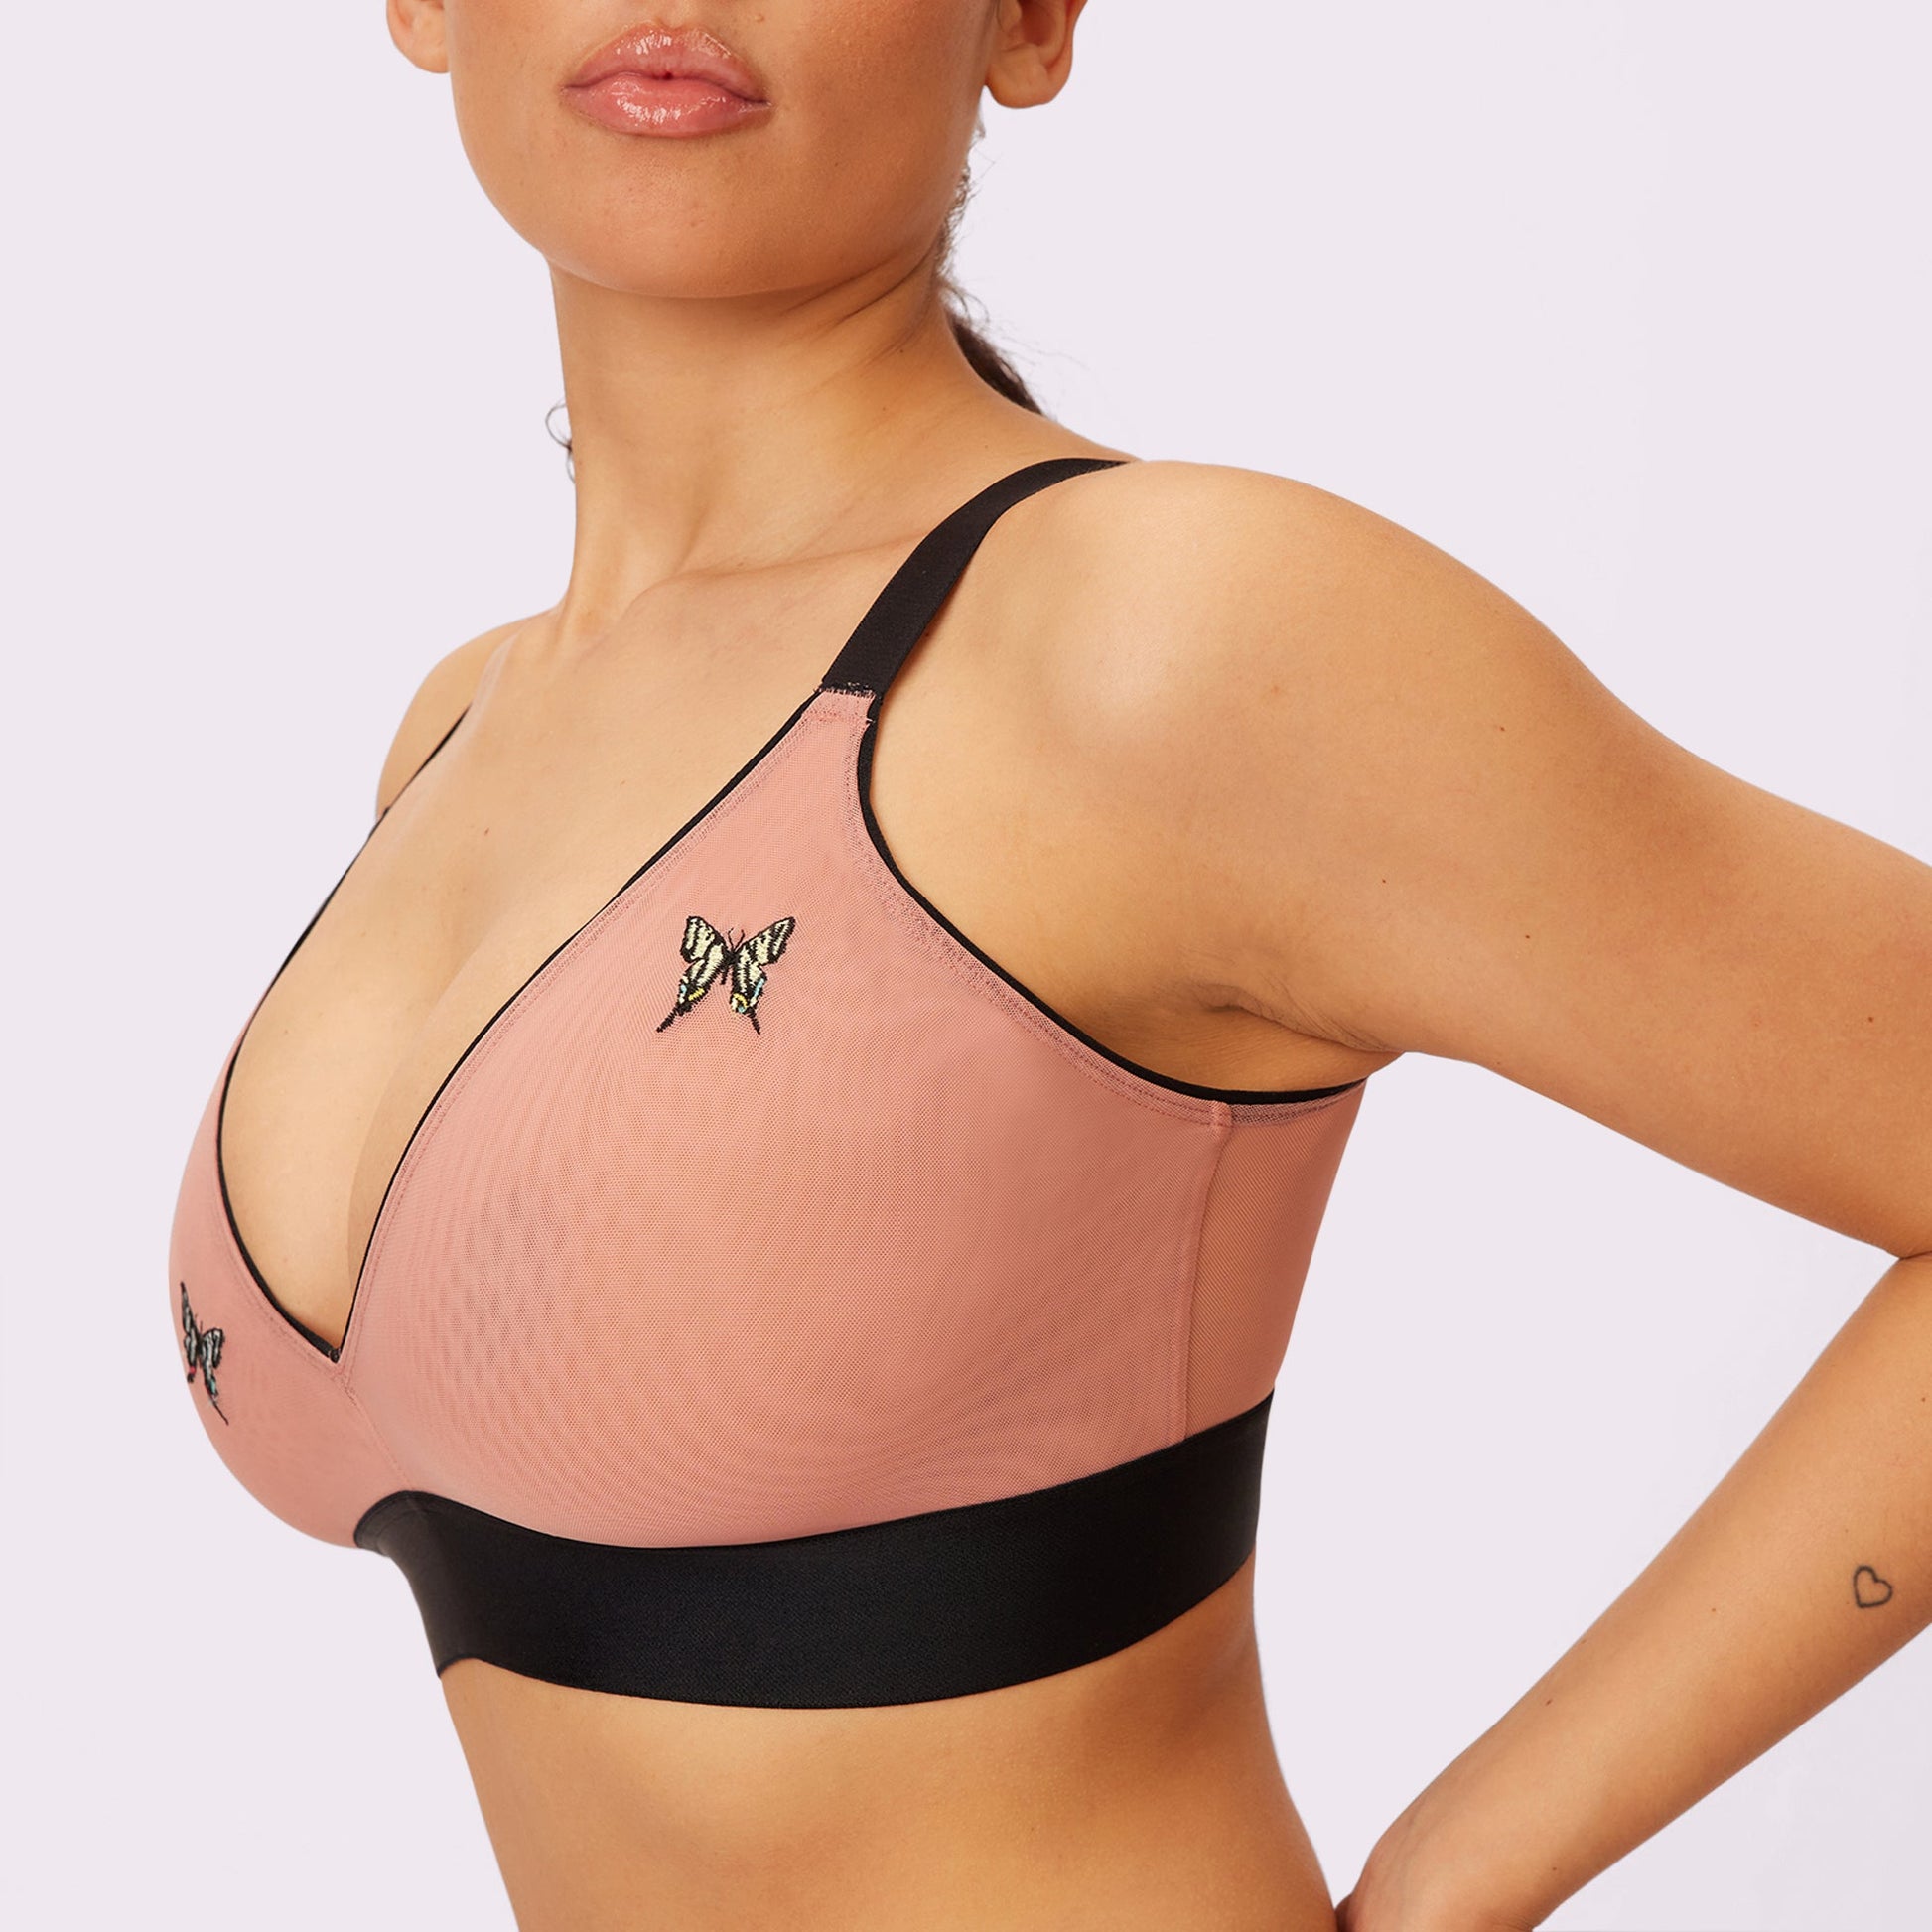 PARADE Silky Mesh Triangle Bralette in color Juice, size M Size M - $10 -  From Sarah